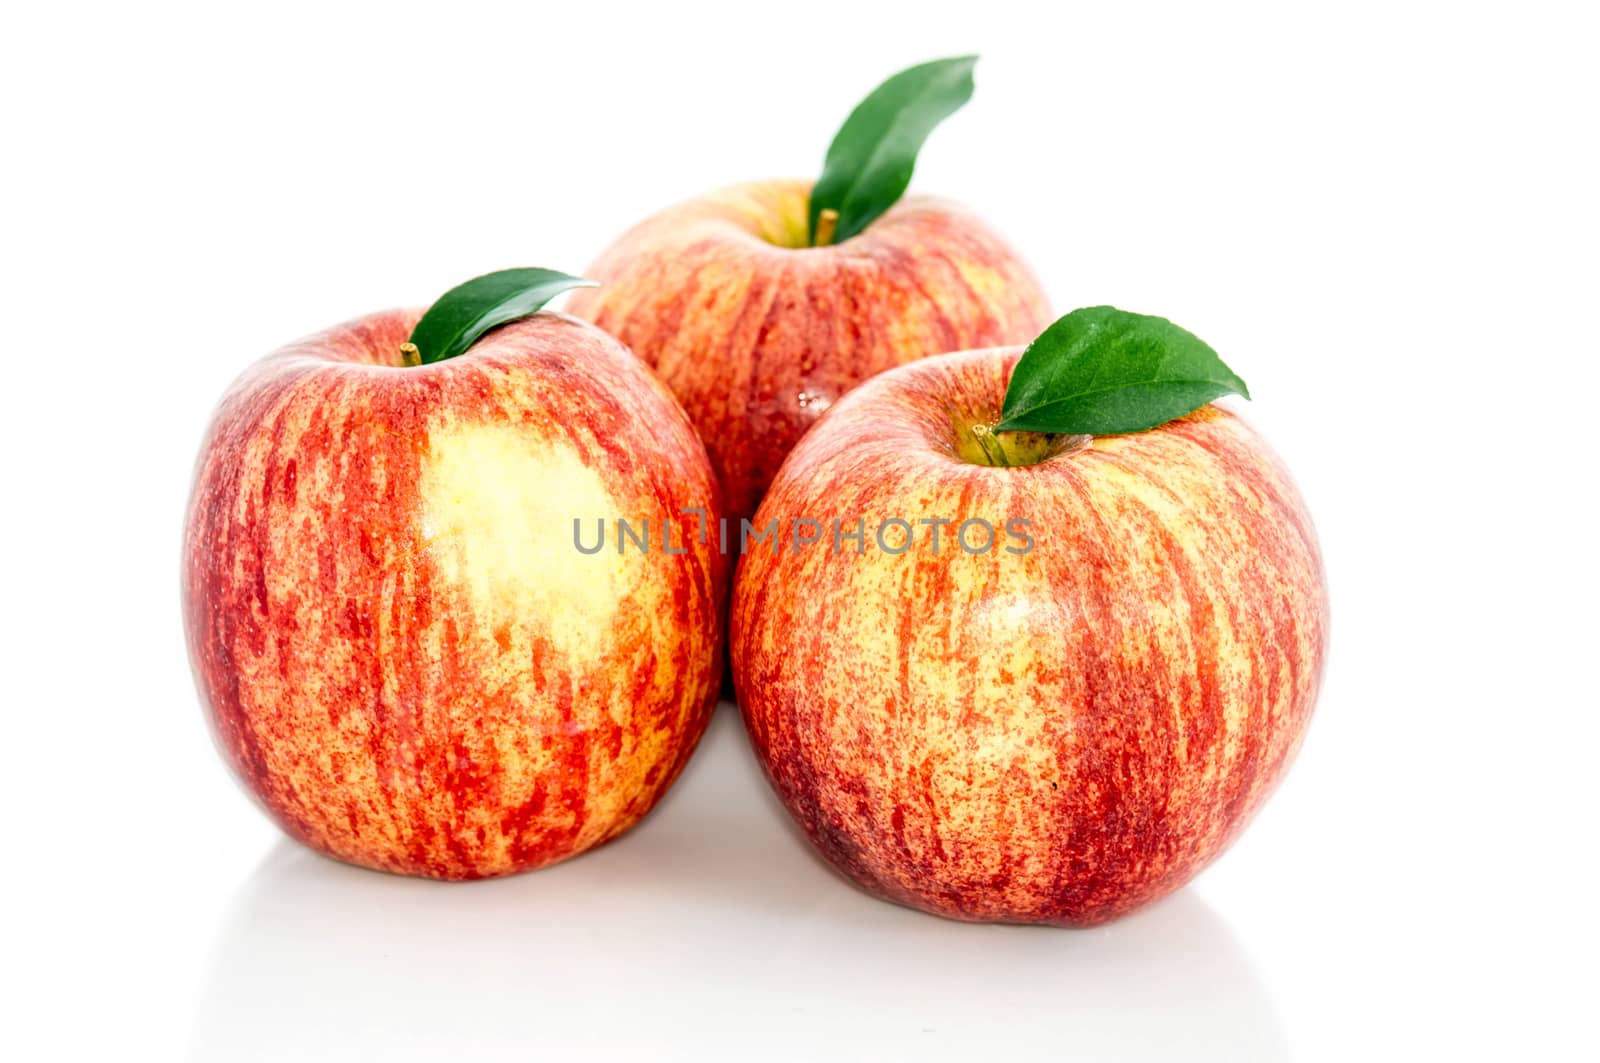 Fresh red apple isolated on a white background.